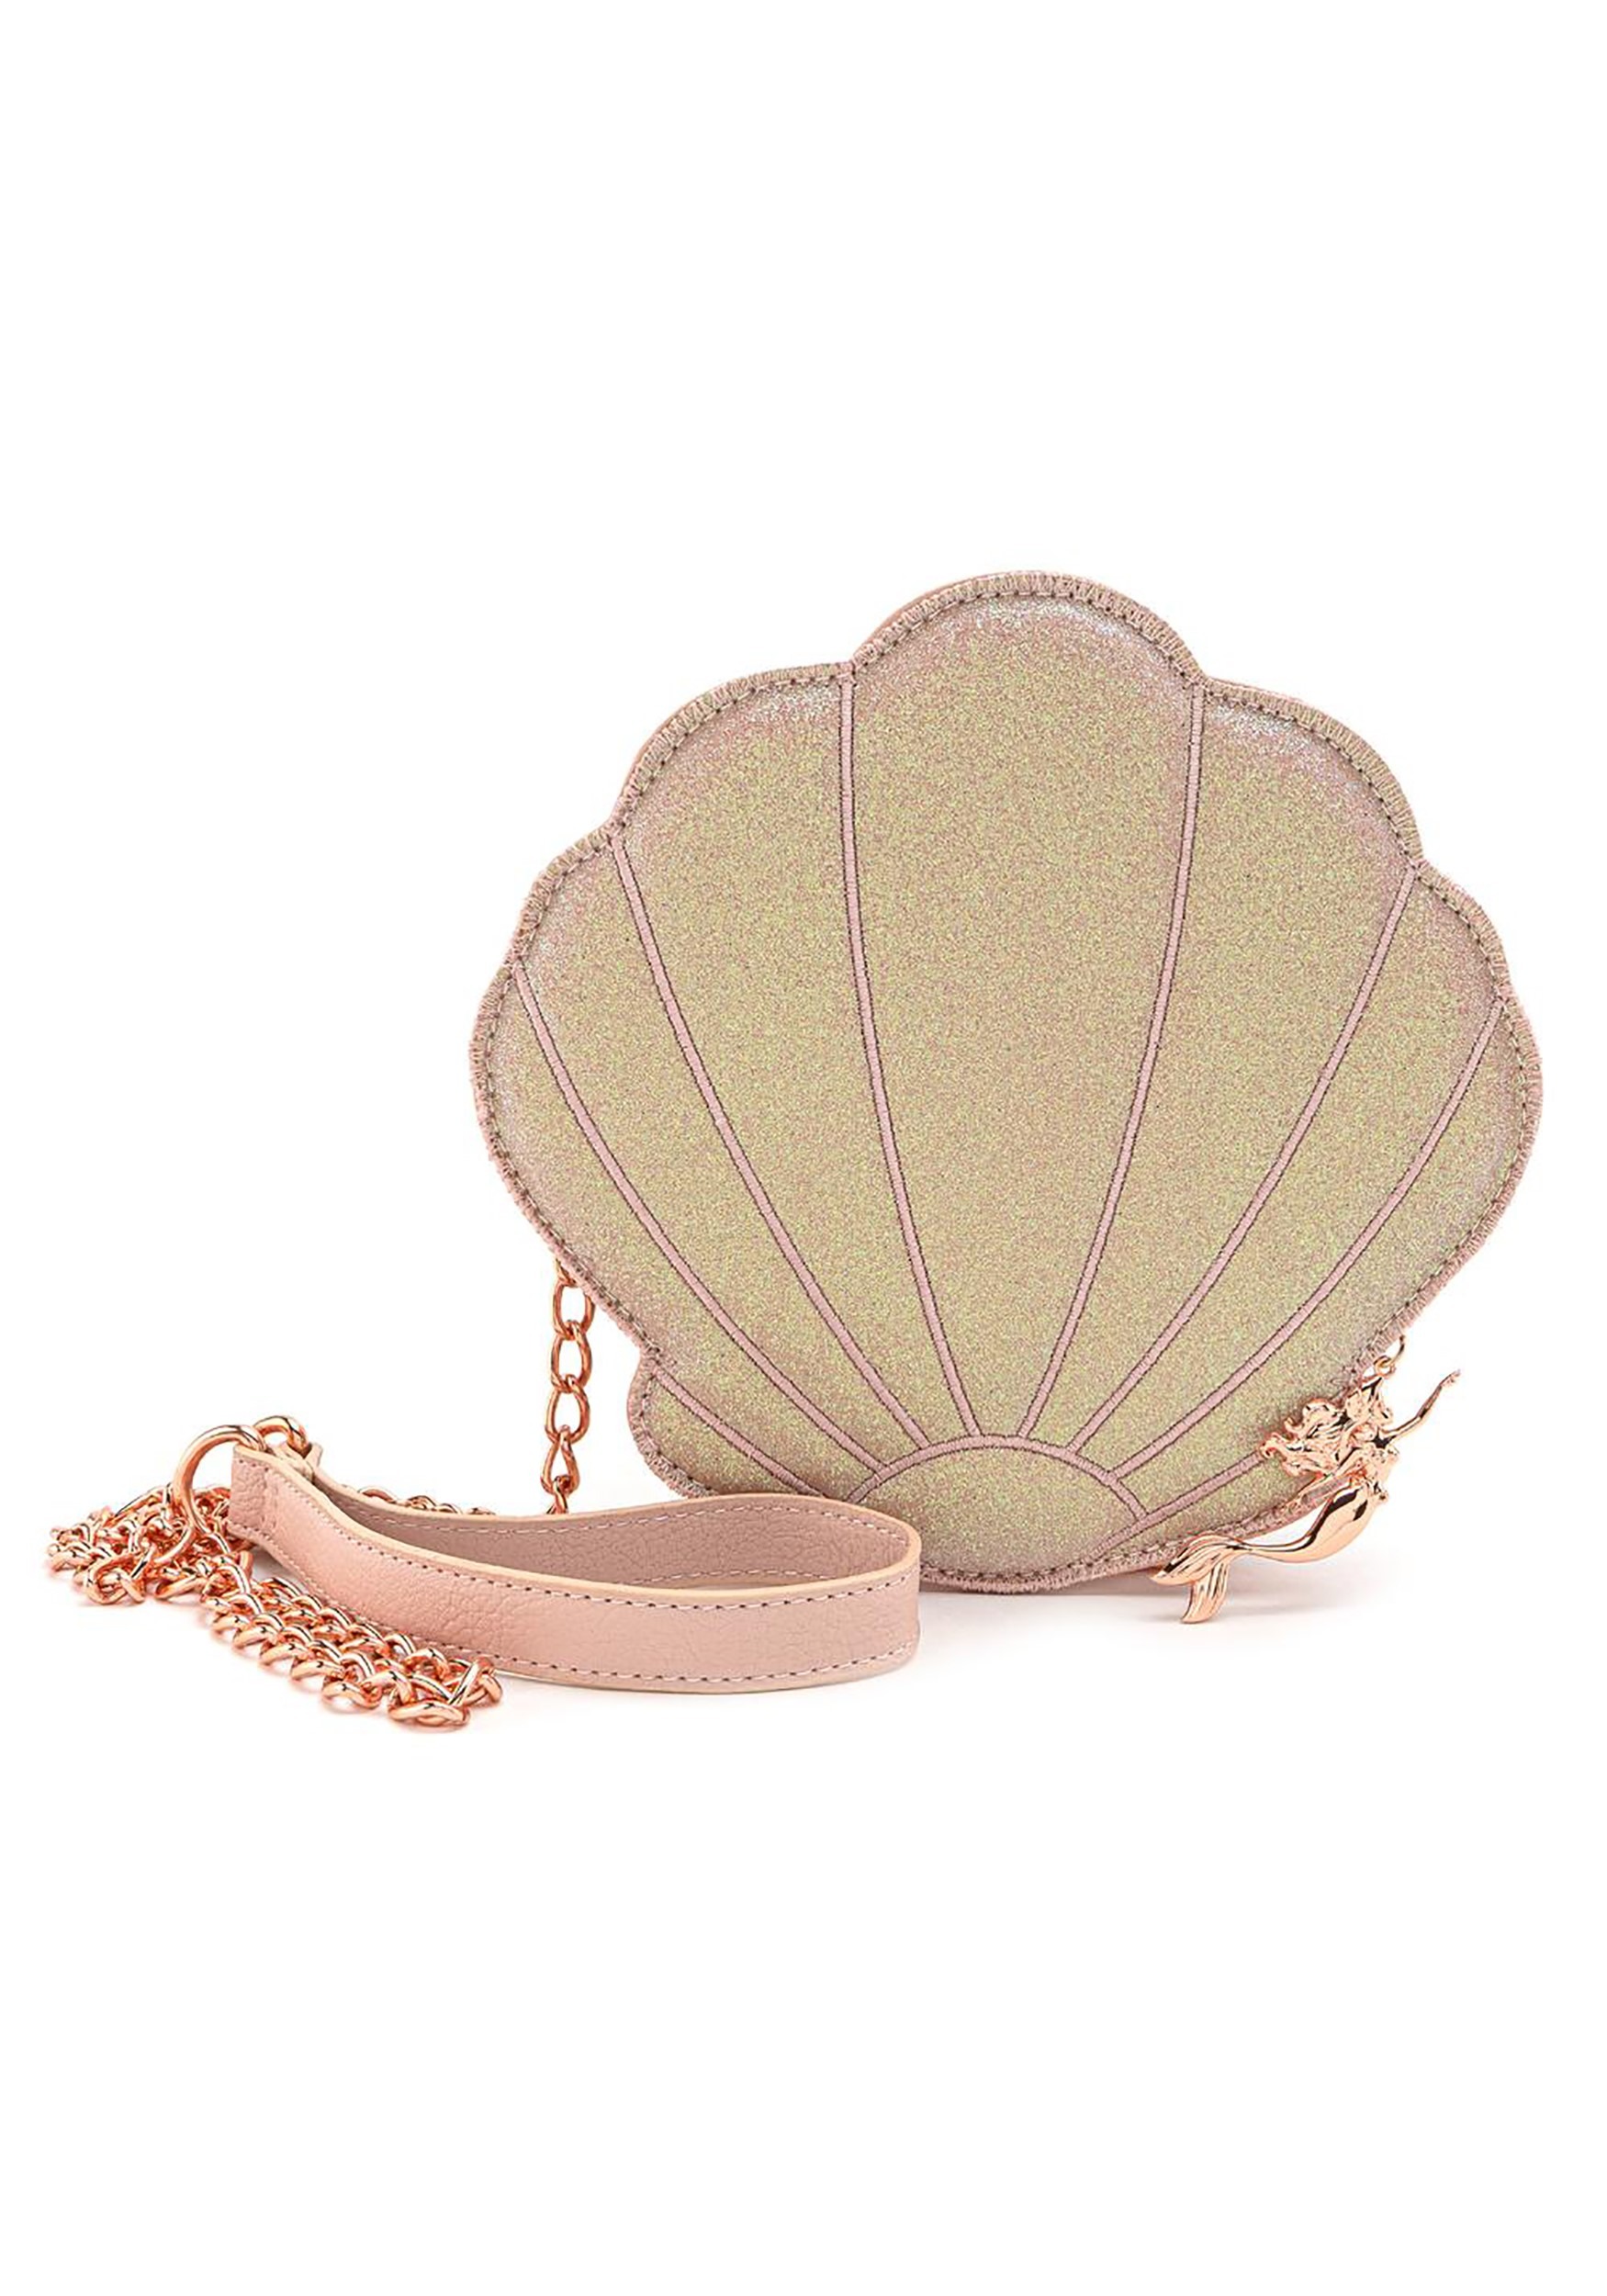 Must Have The Little Mermaid Seashell Crossbody Loungefly Bag From Loungefly Fandom Shop - black off block side bag roblox